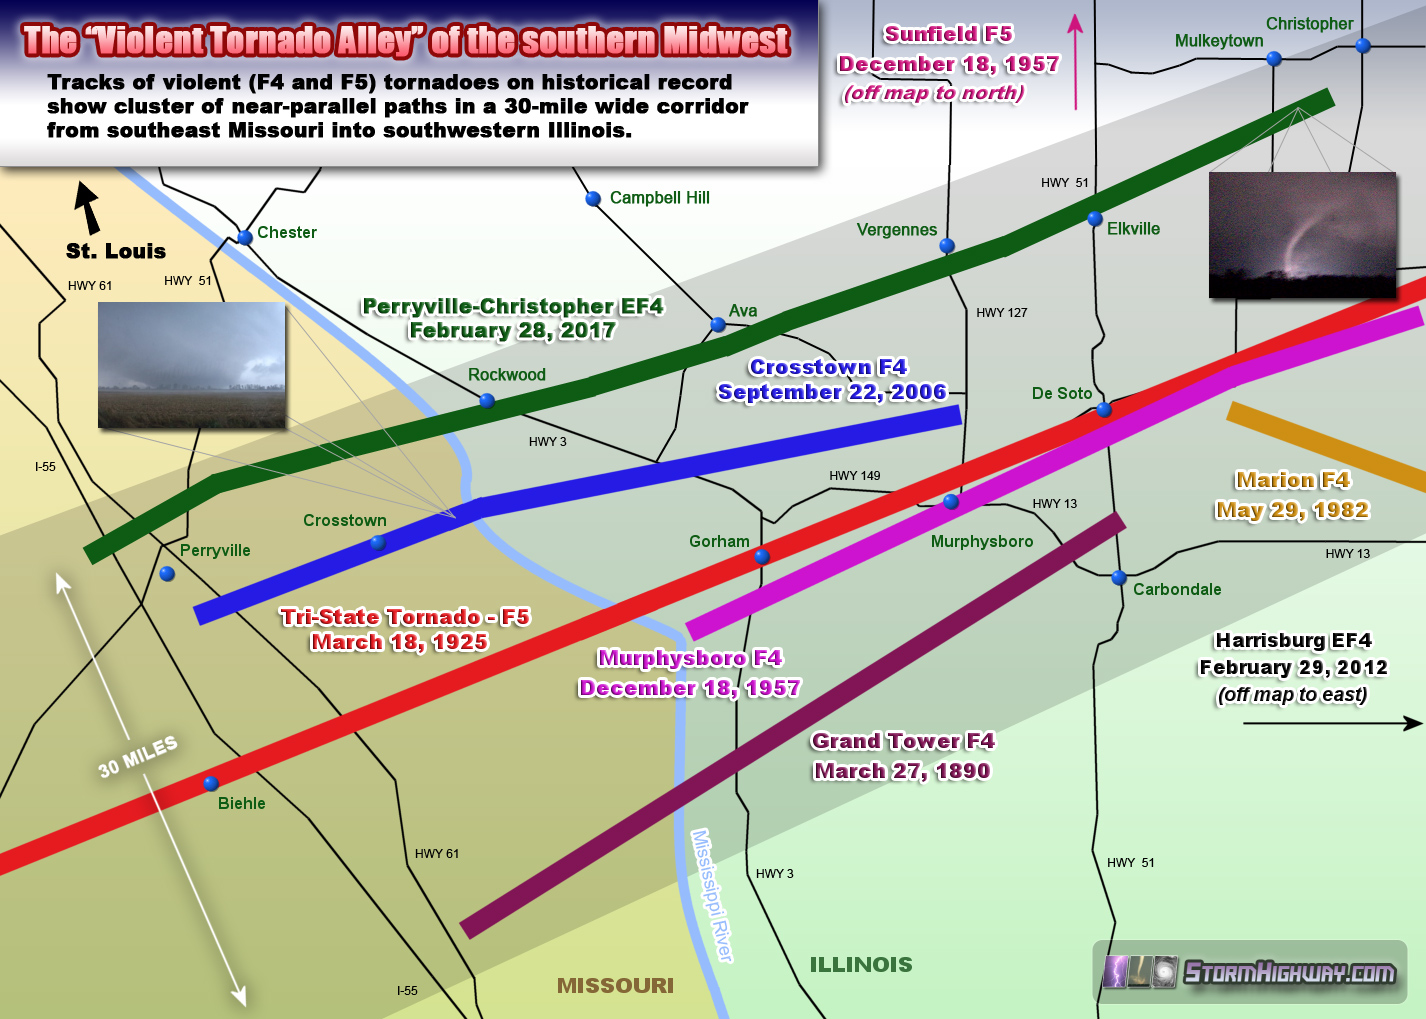 The Violent Tornado Alley of the southern Midwest